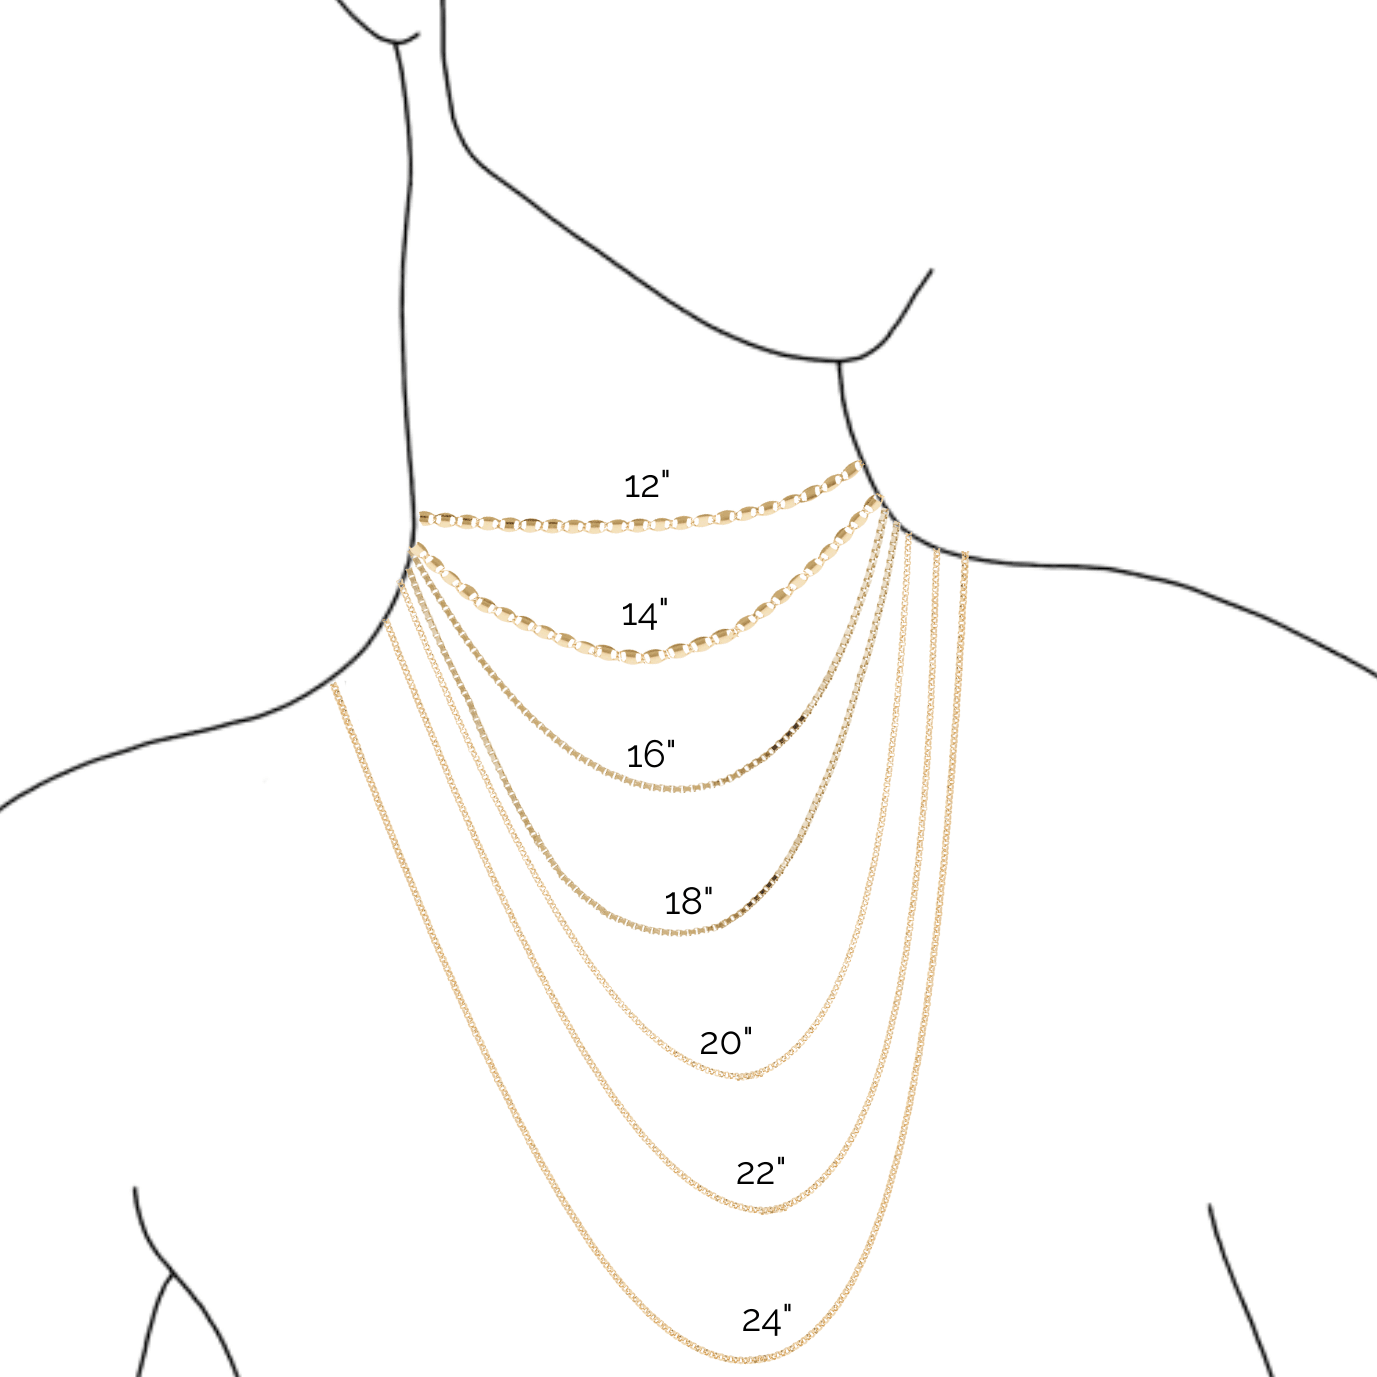 Your Necklace Length Guide